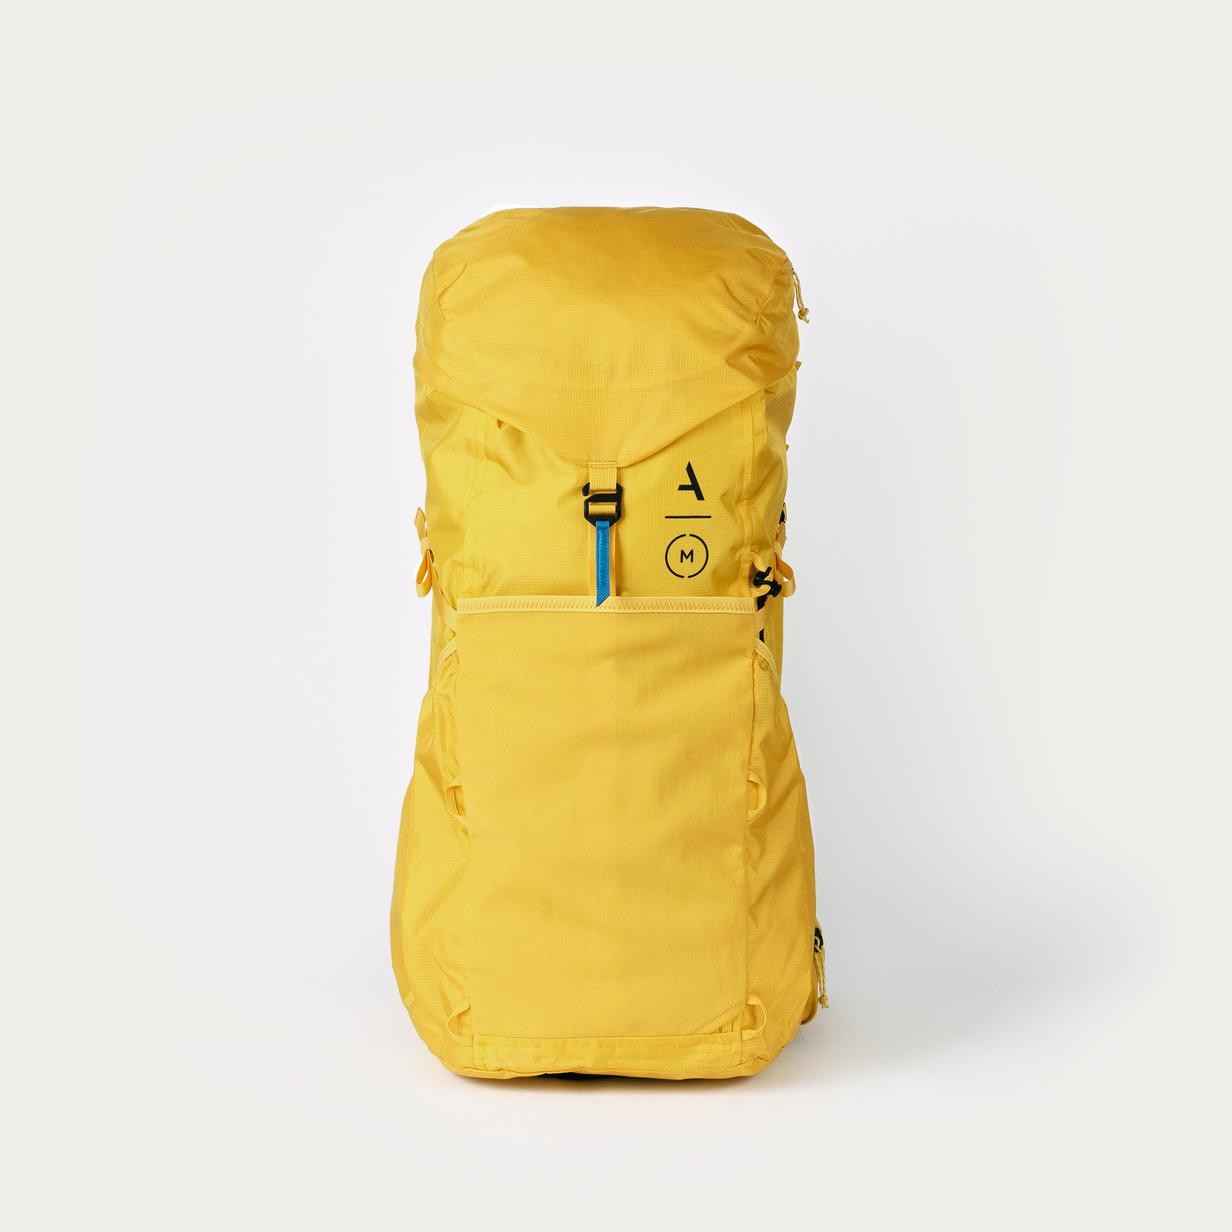 106 167 moment strohl backpack yellow 1